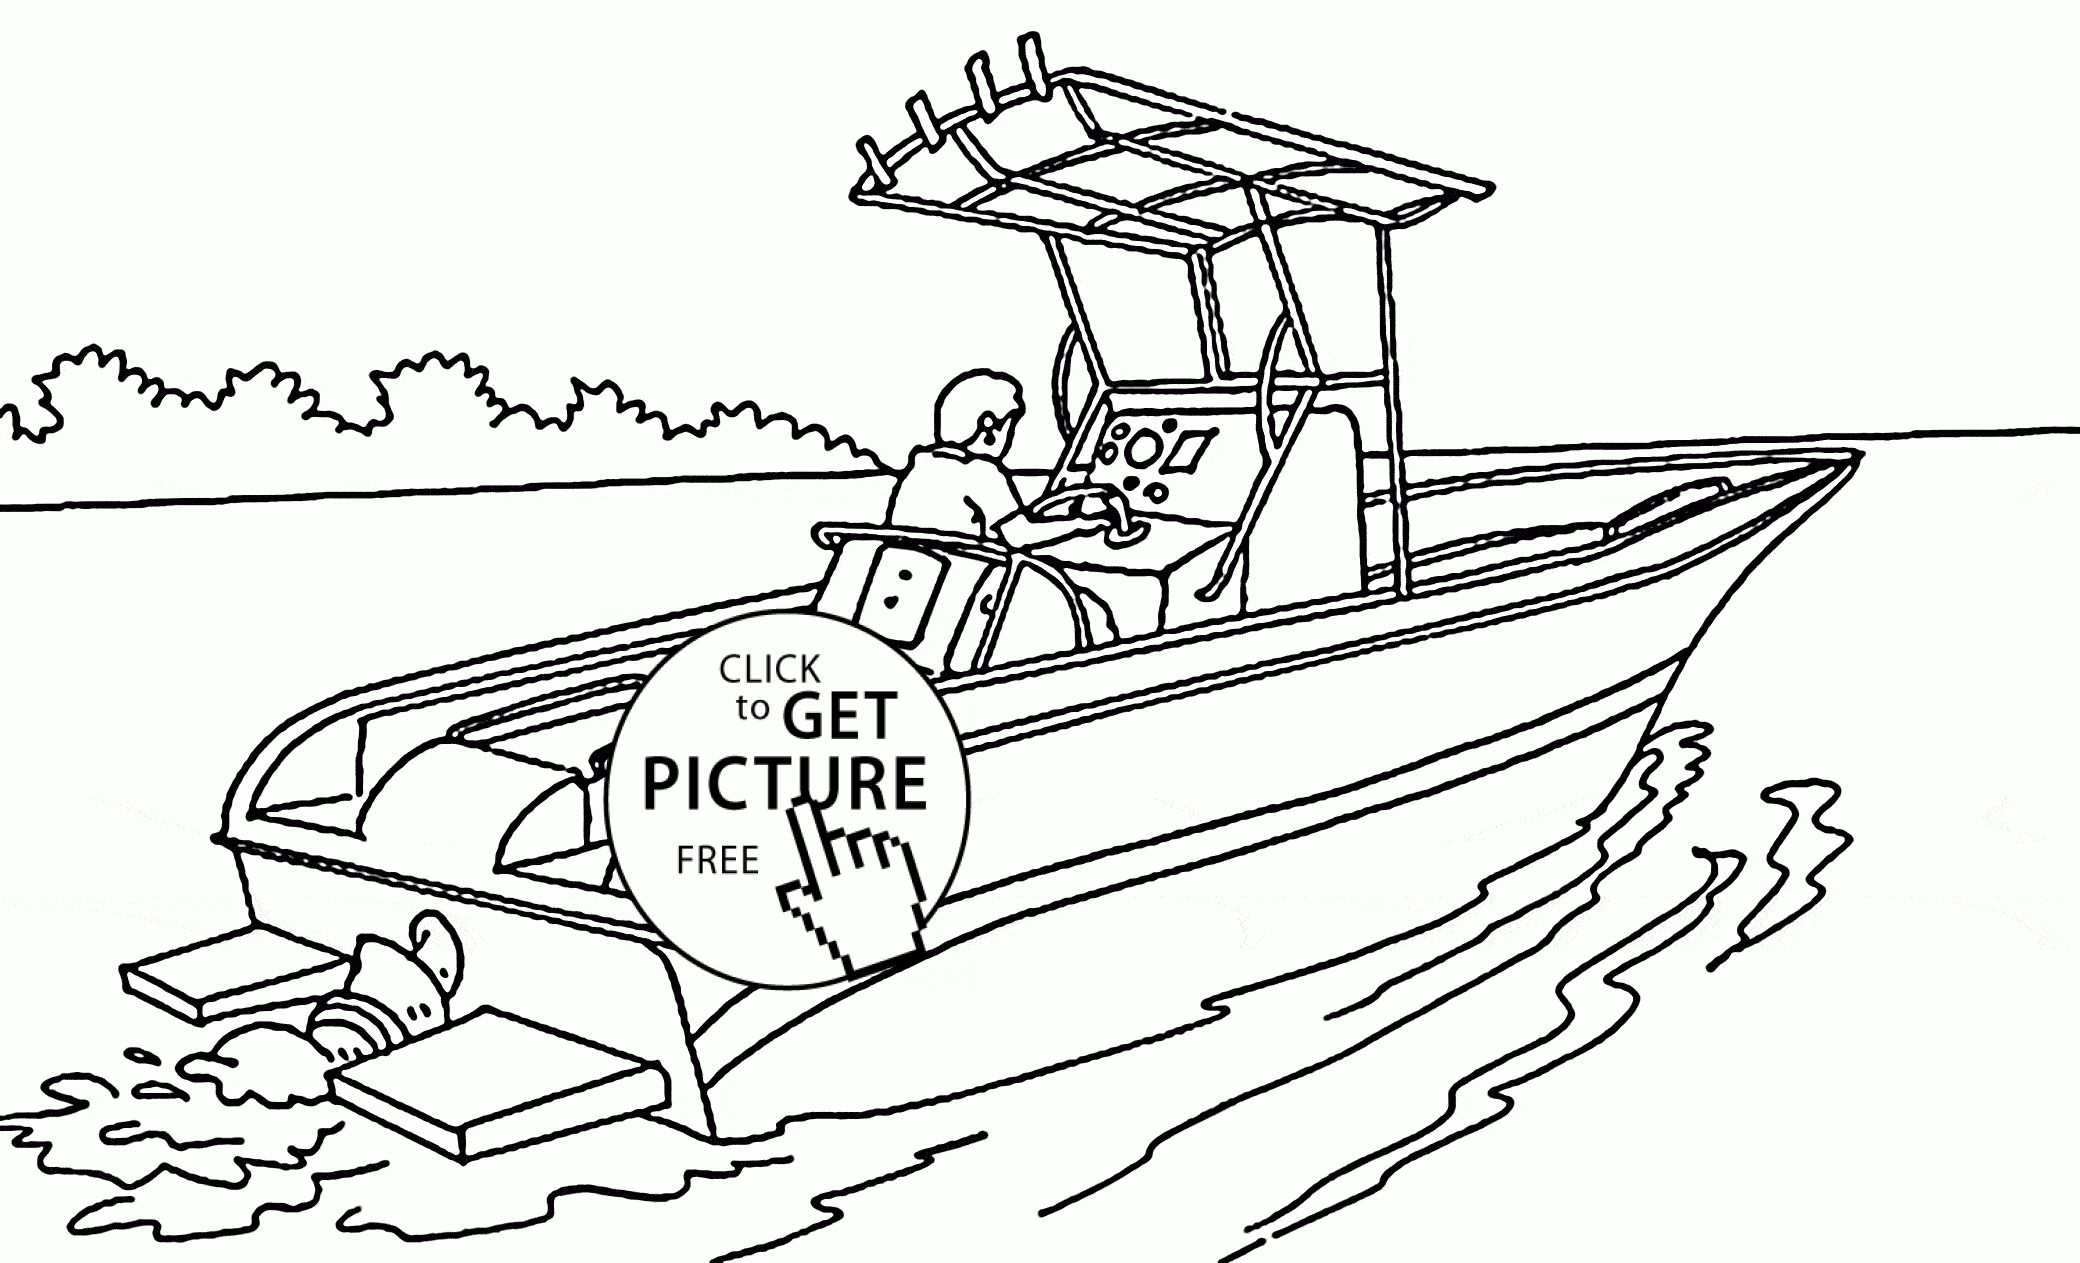 Real speed boat coloring page for kids transportation coloring pages printables free